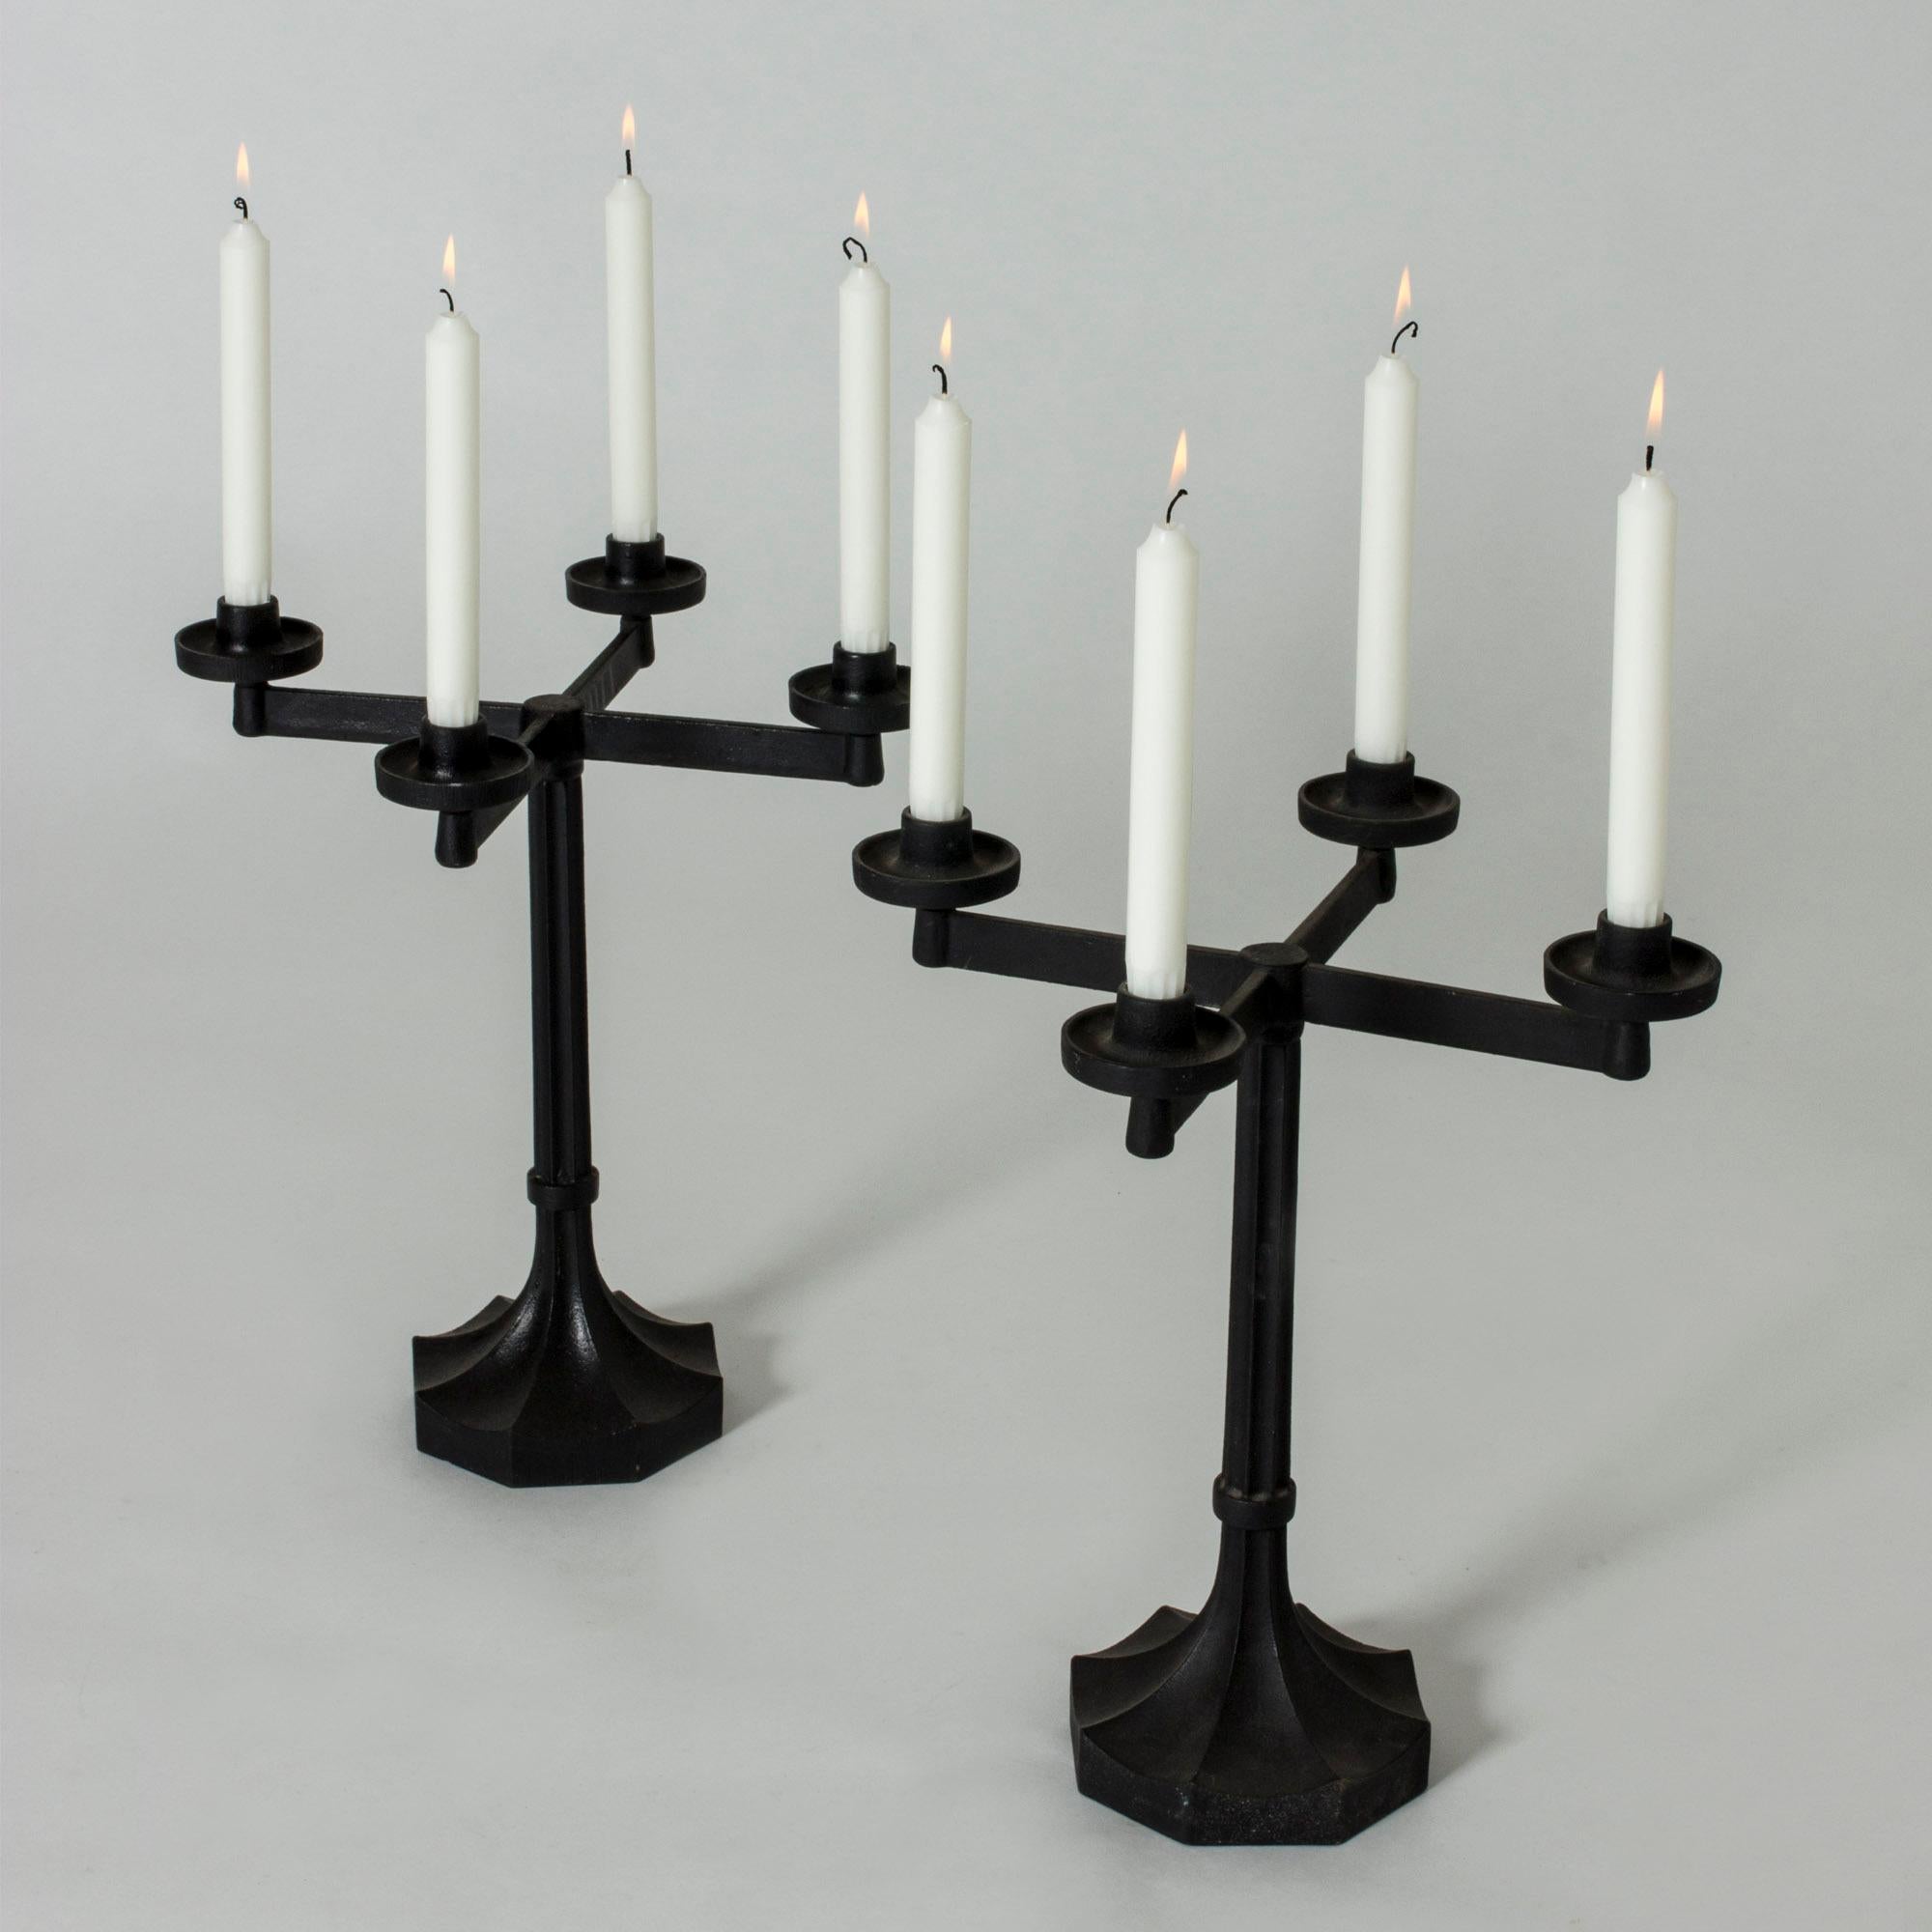 Mid-20th Century Pair of Swedish Cast Iron Candlesticks Designed by Sigurd Persson for Kockums